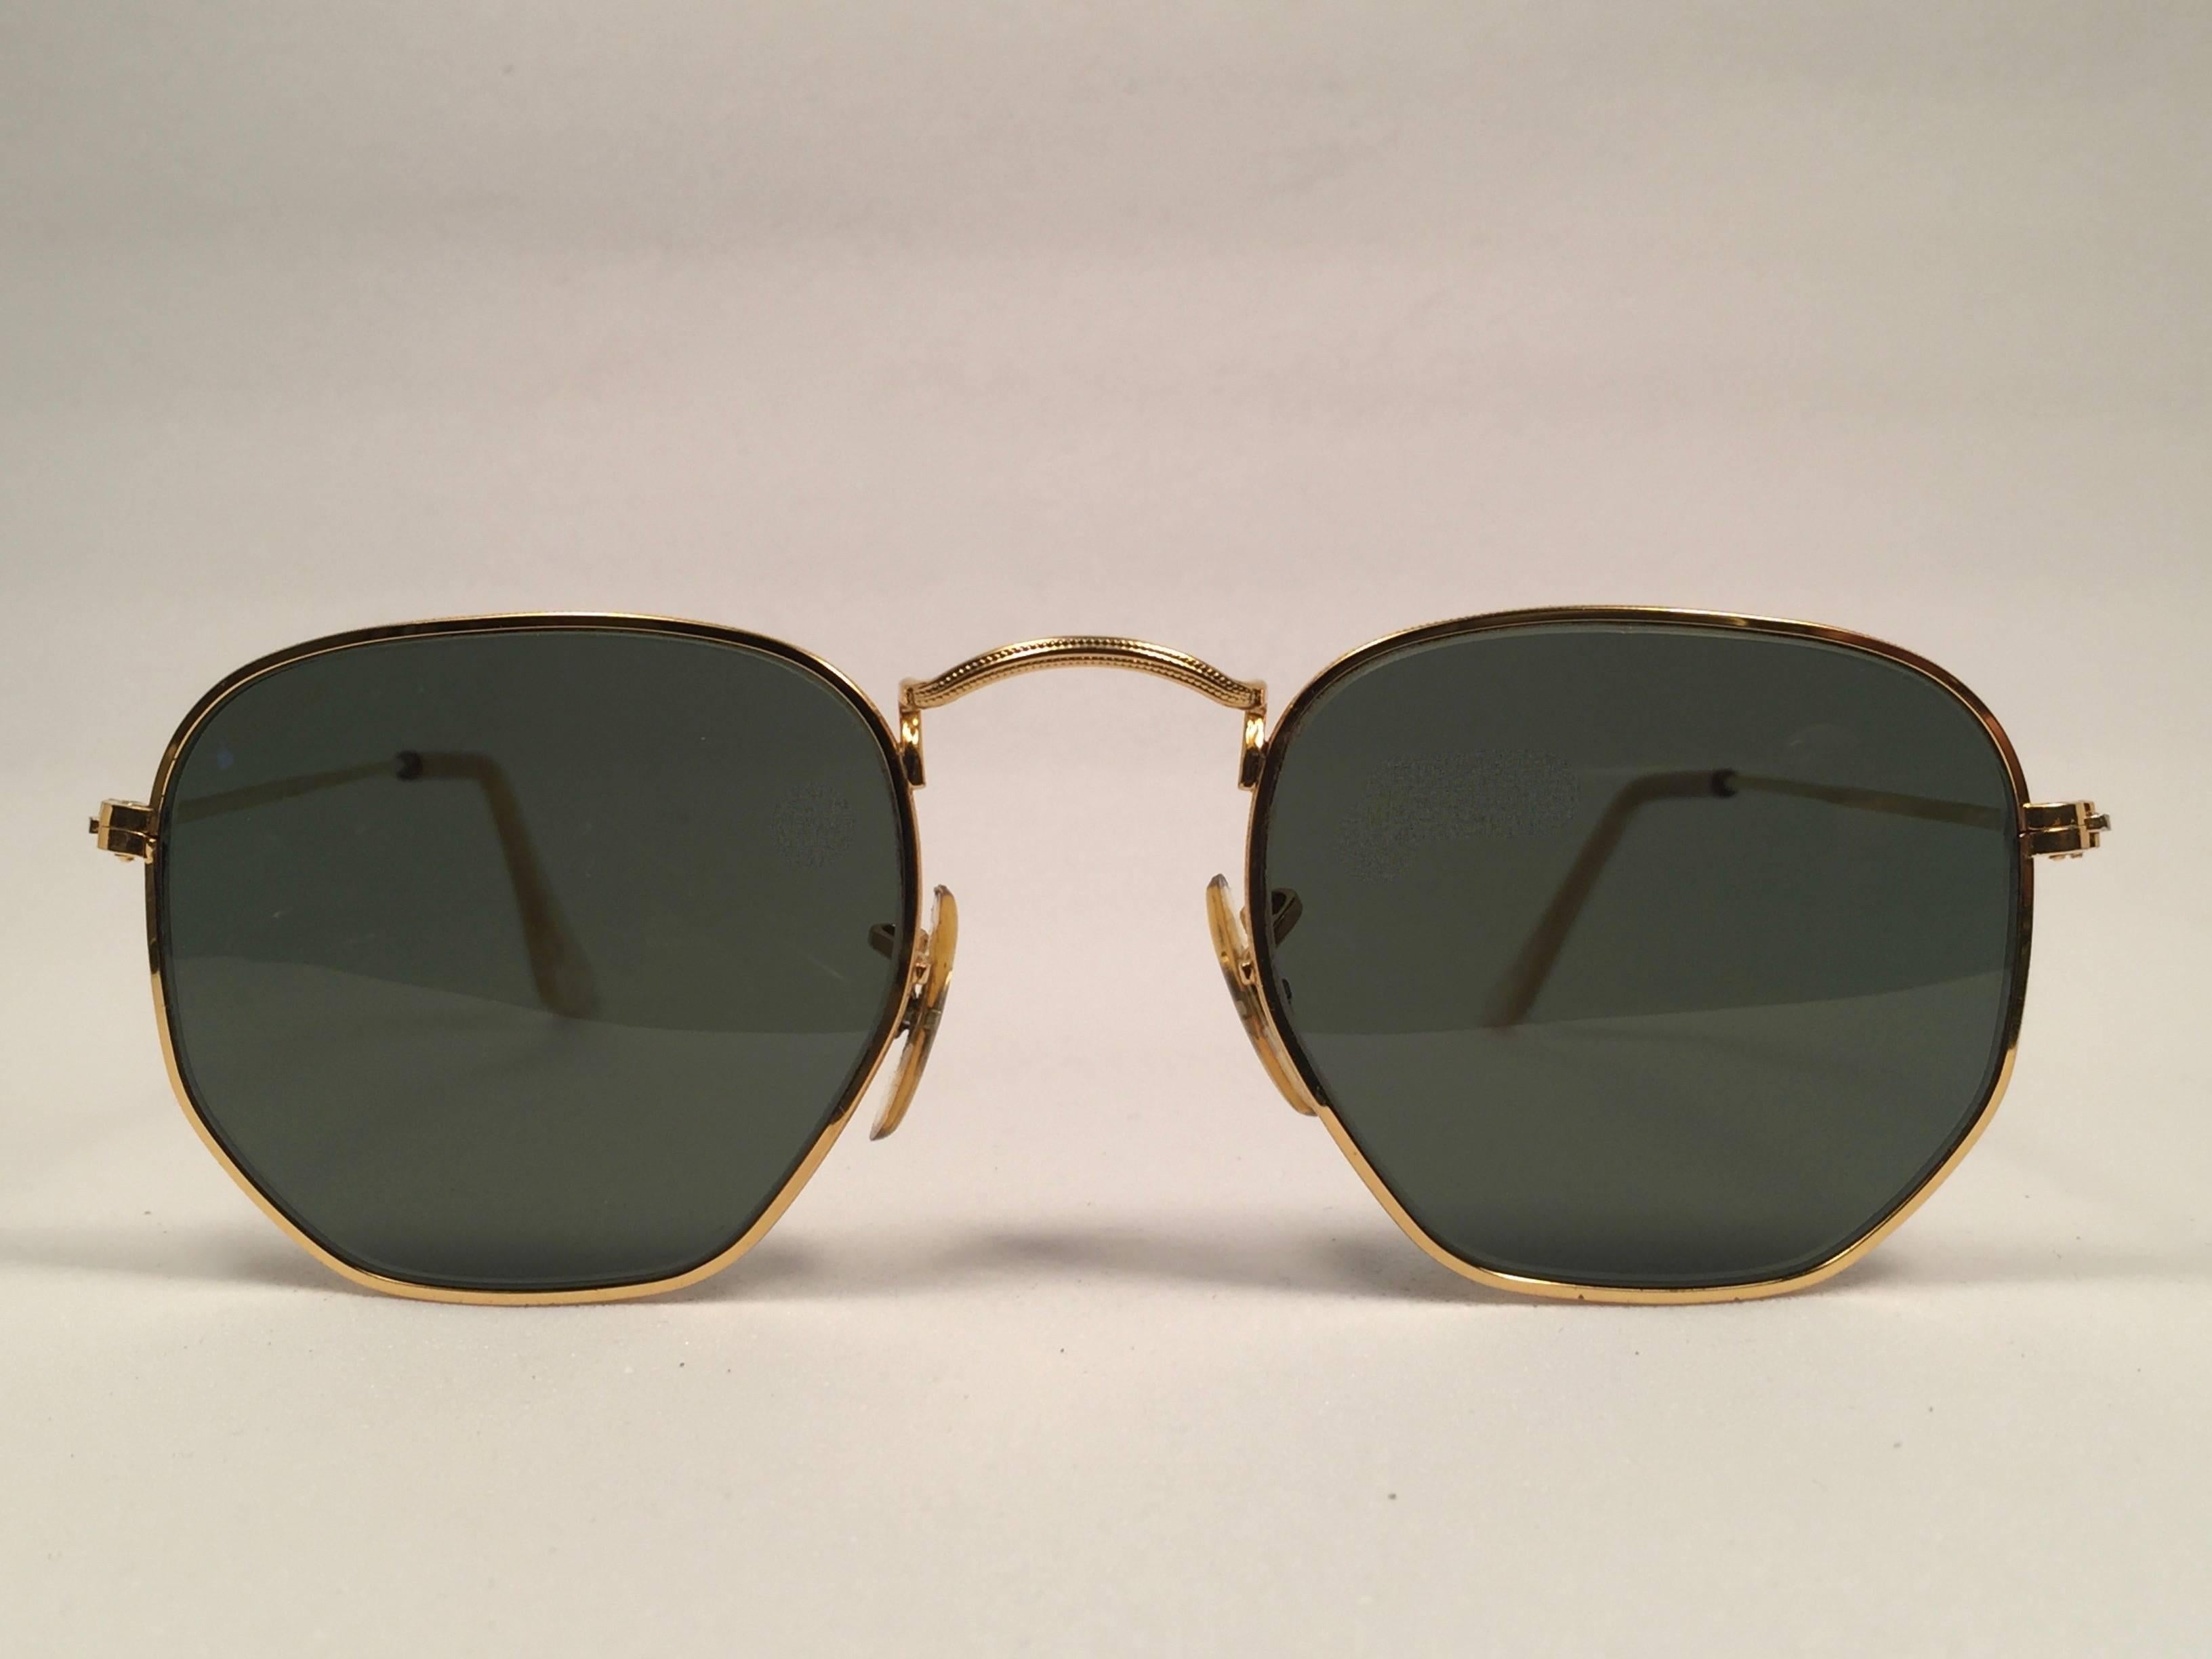 New Vintage Ray Ban classic hexagonal gold sporting G15 grey lenses.
Comes with its original Ray Ban B&L case with minor sign of wear due to storage.  
